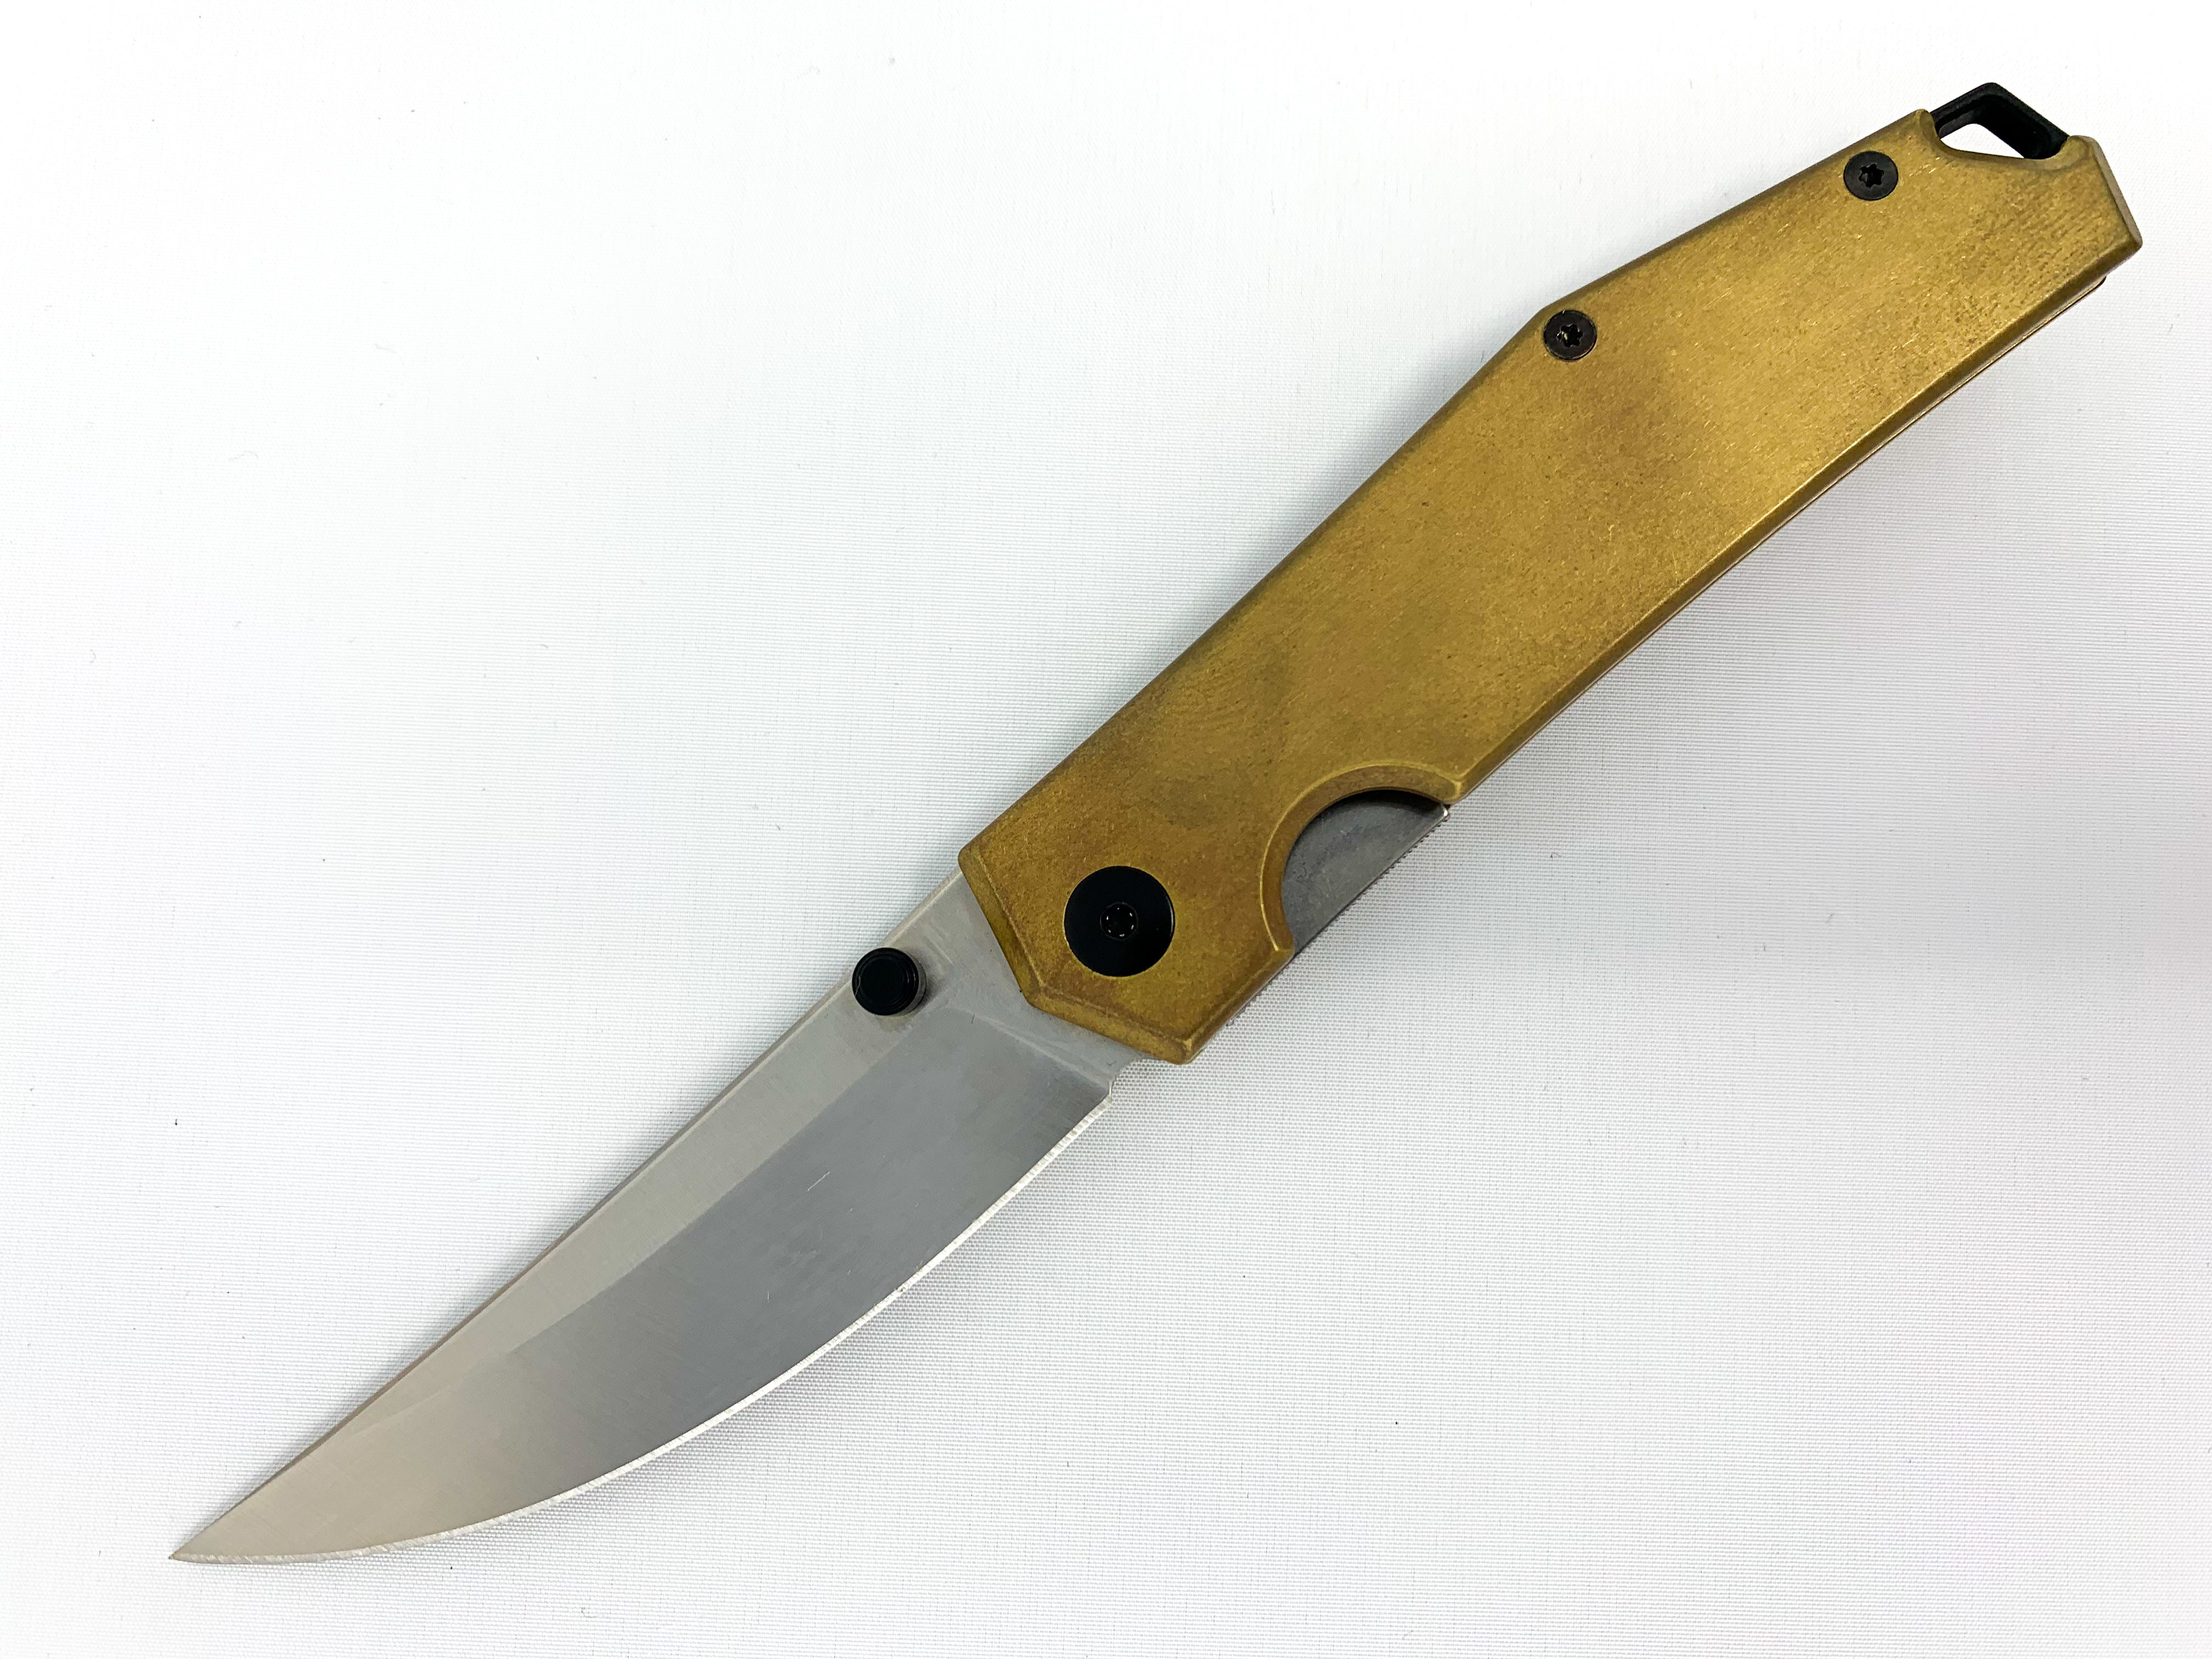 GiantMouse ACE Clyde - Brass Handle - M390 - Liner Lock